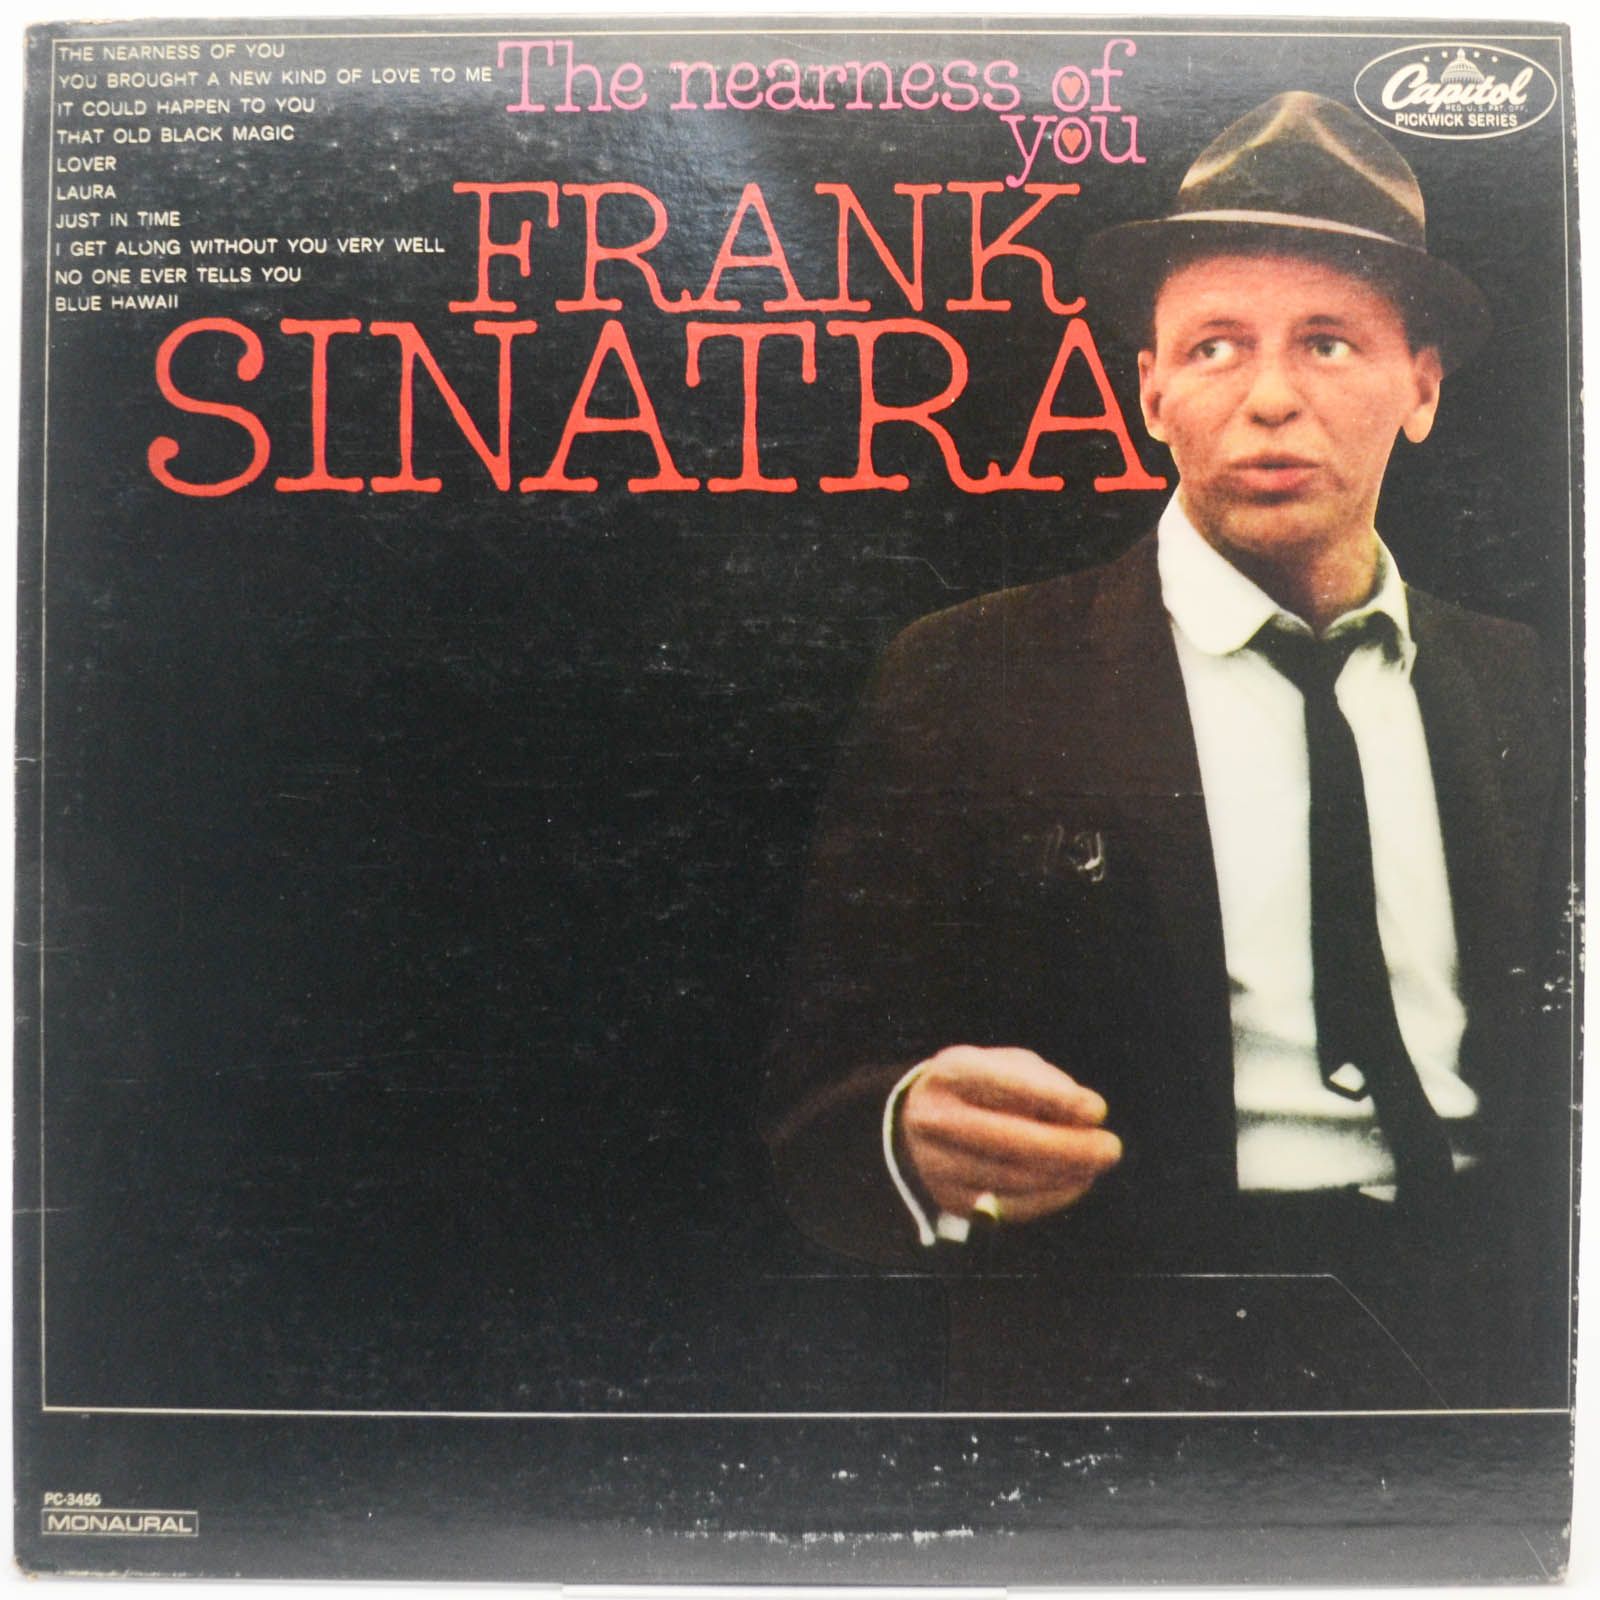 Frank Sinatra — The Nearness Of You (1-st, USA), 1967